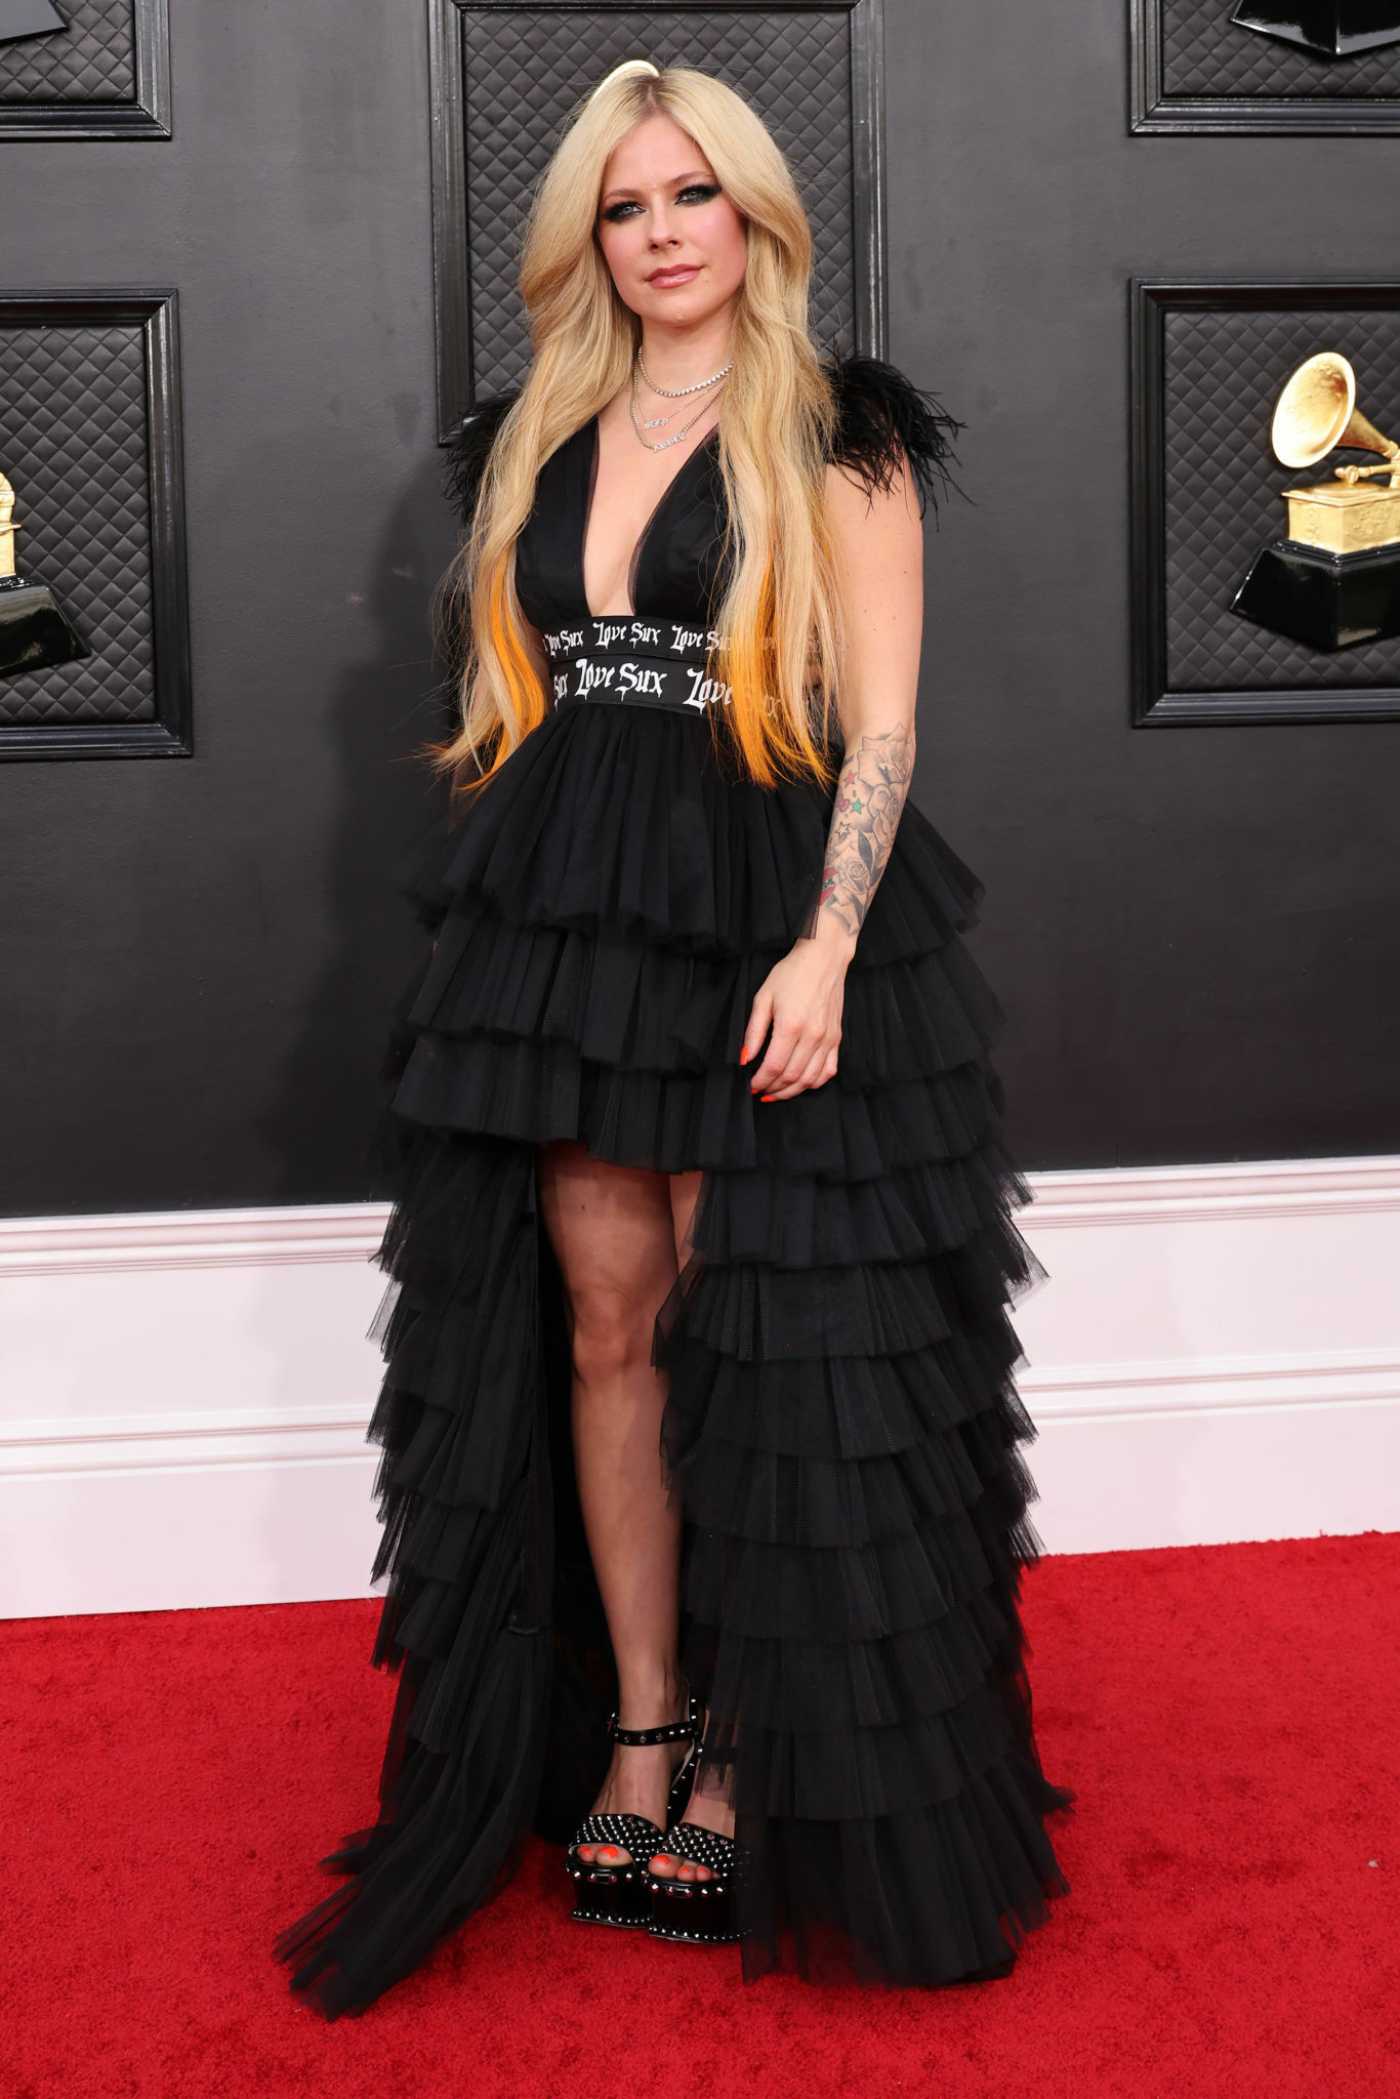 Avril Lavigne Attends the 64th Annual Grammy Awards at the MGM Grand Garden Arena in Las Vegas 04/03/2022